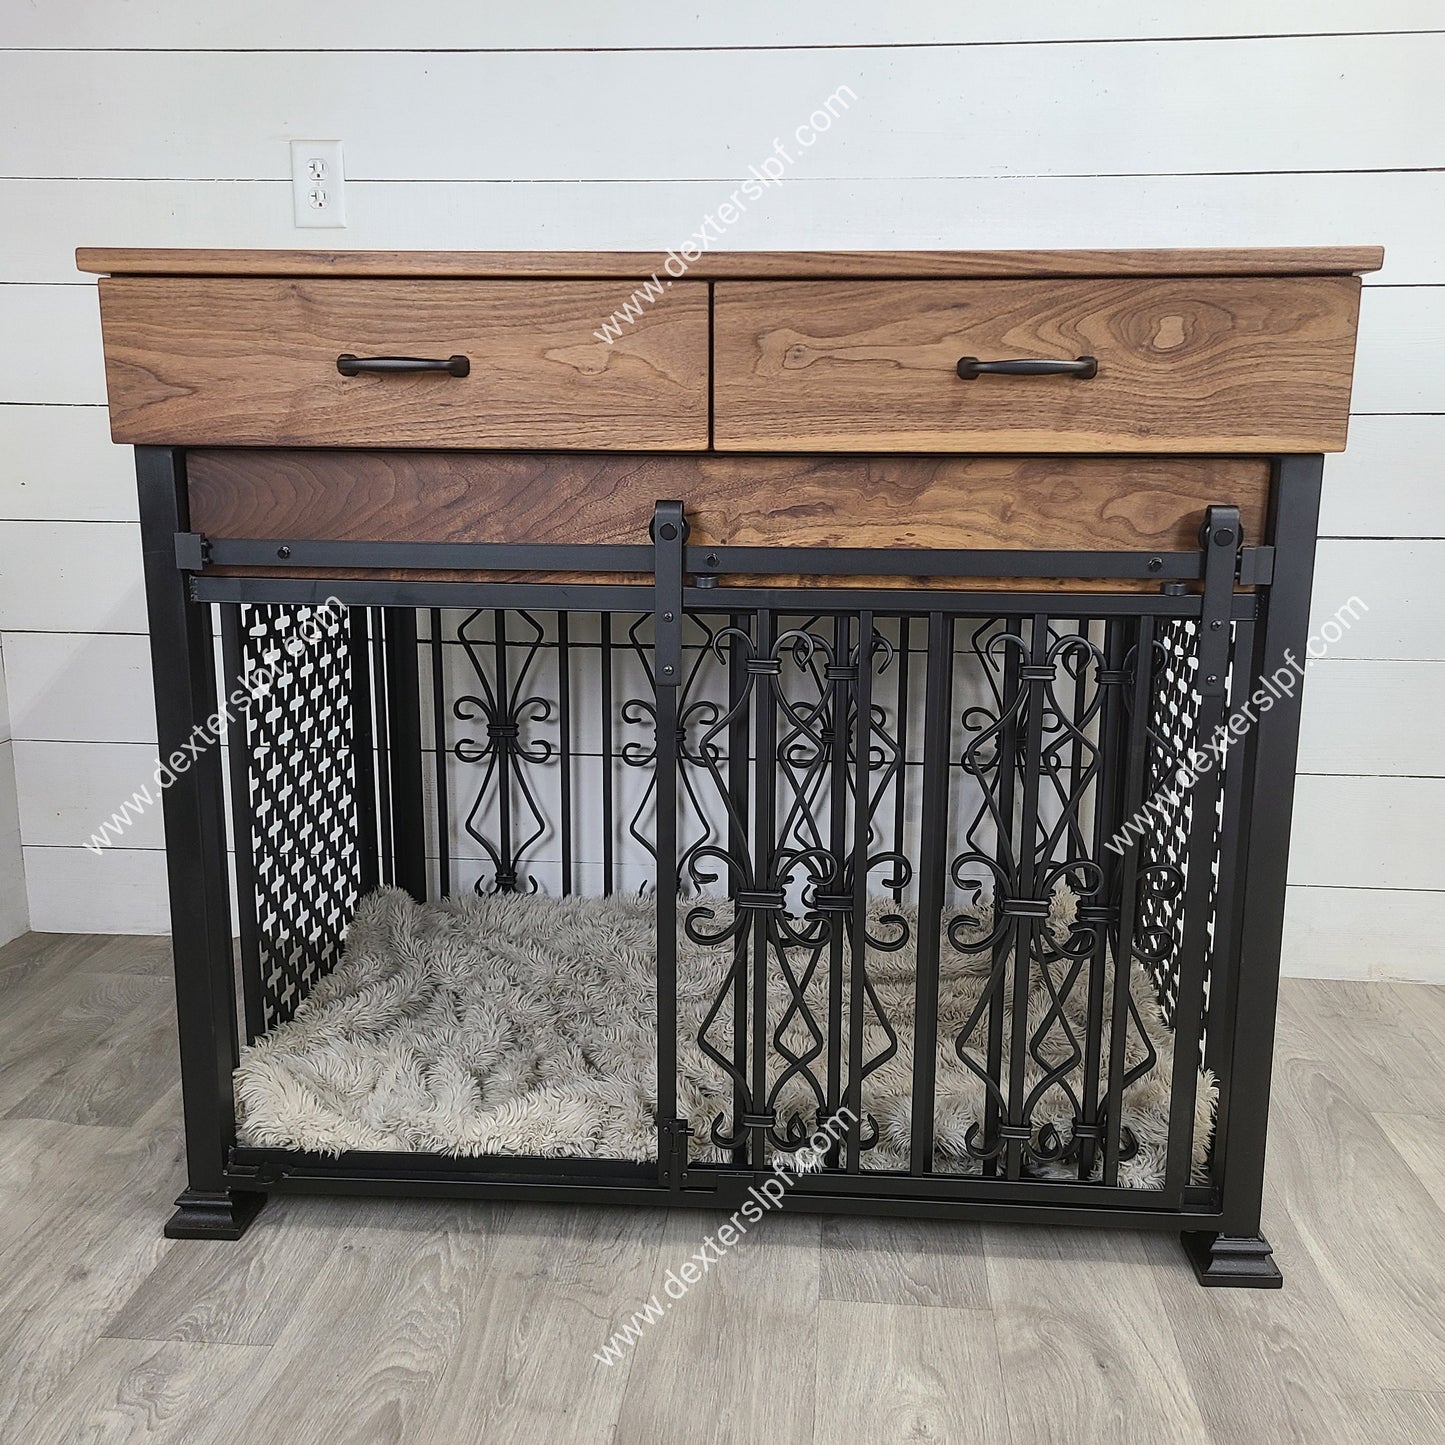 Ruby X-Large Dog Kennel with Sliding Door, Luxury Dog Crate, Dog Kennel Furniture, Dog Crate End Table, Dog Crate Furniture